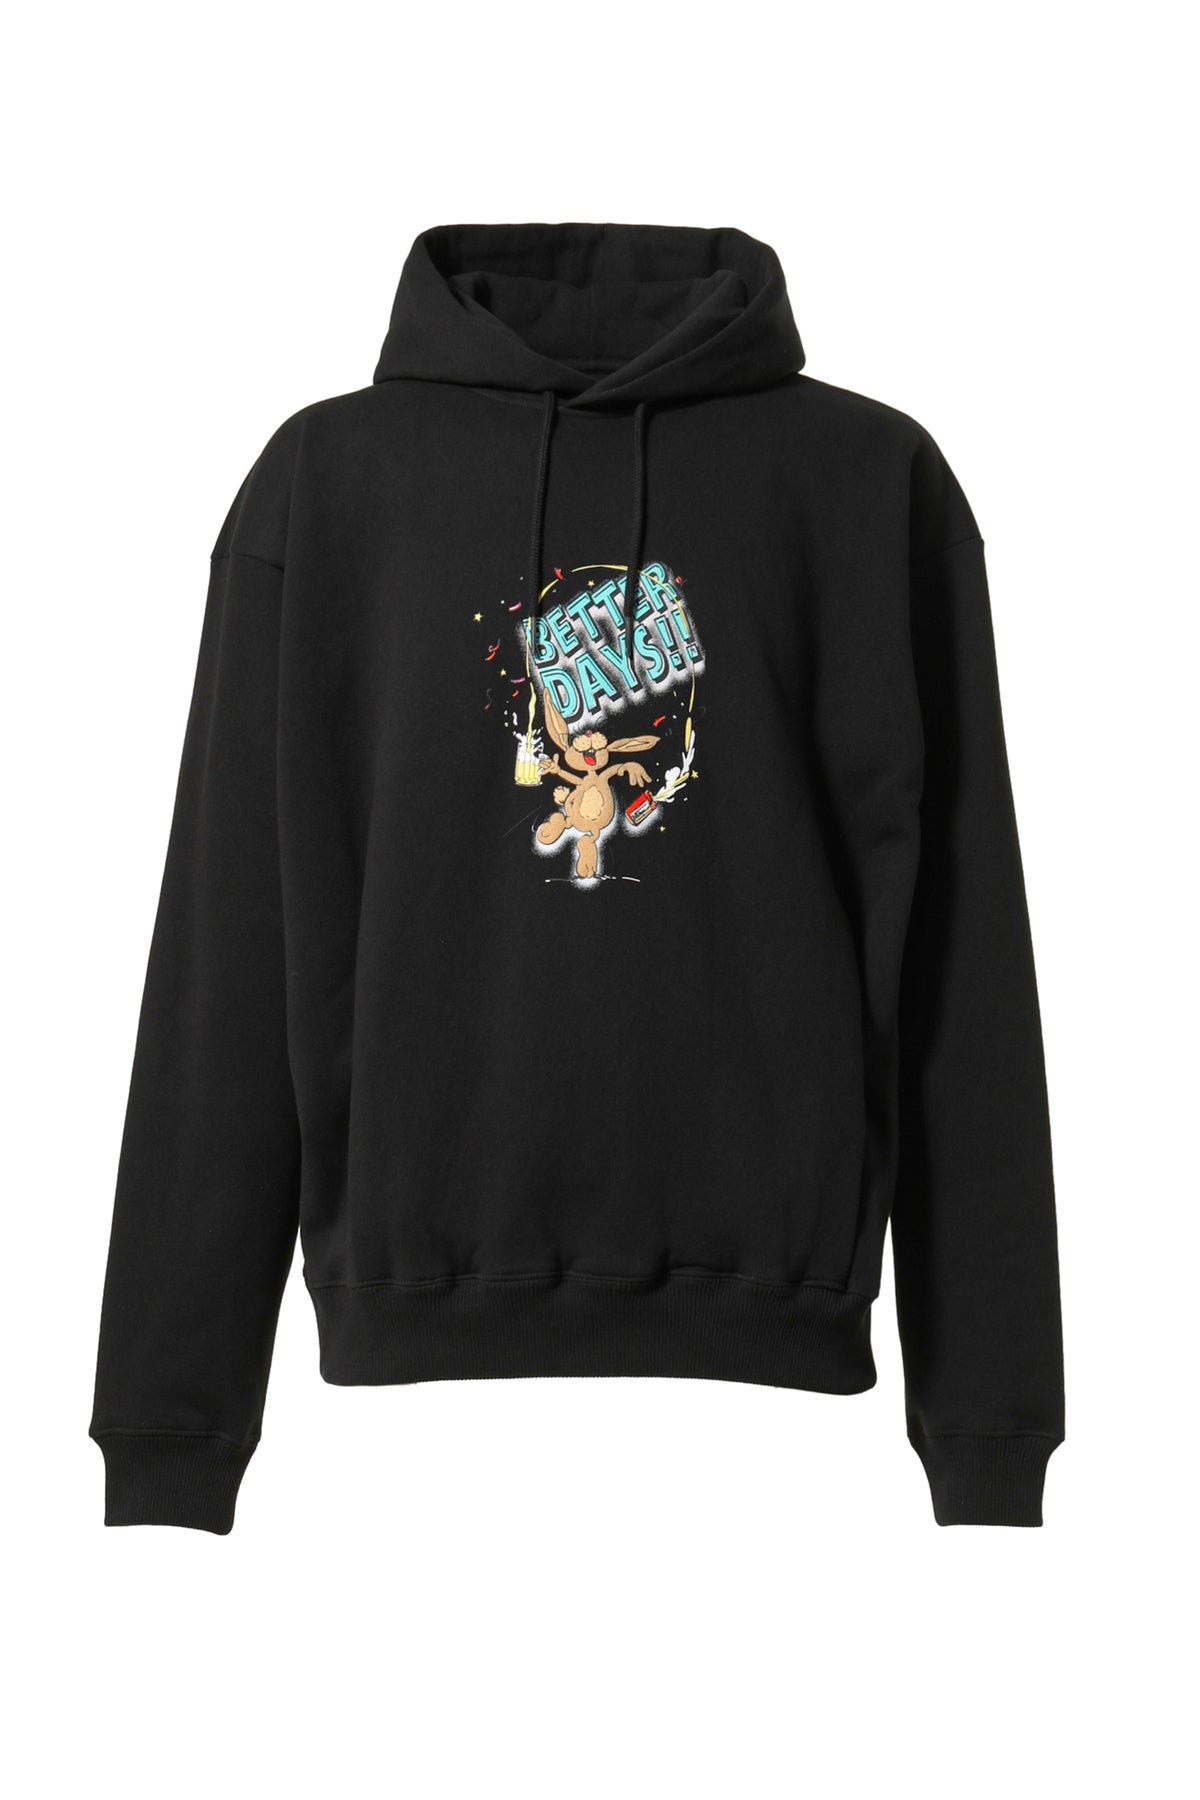 Martine Rose CLASSIC HOODIE / BLK BETTER DAYS BUNNY